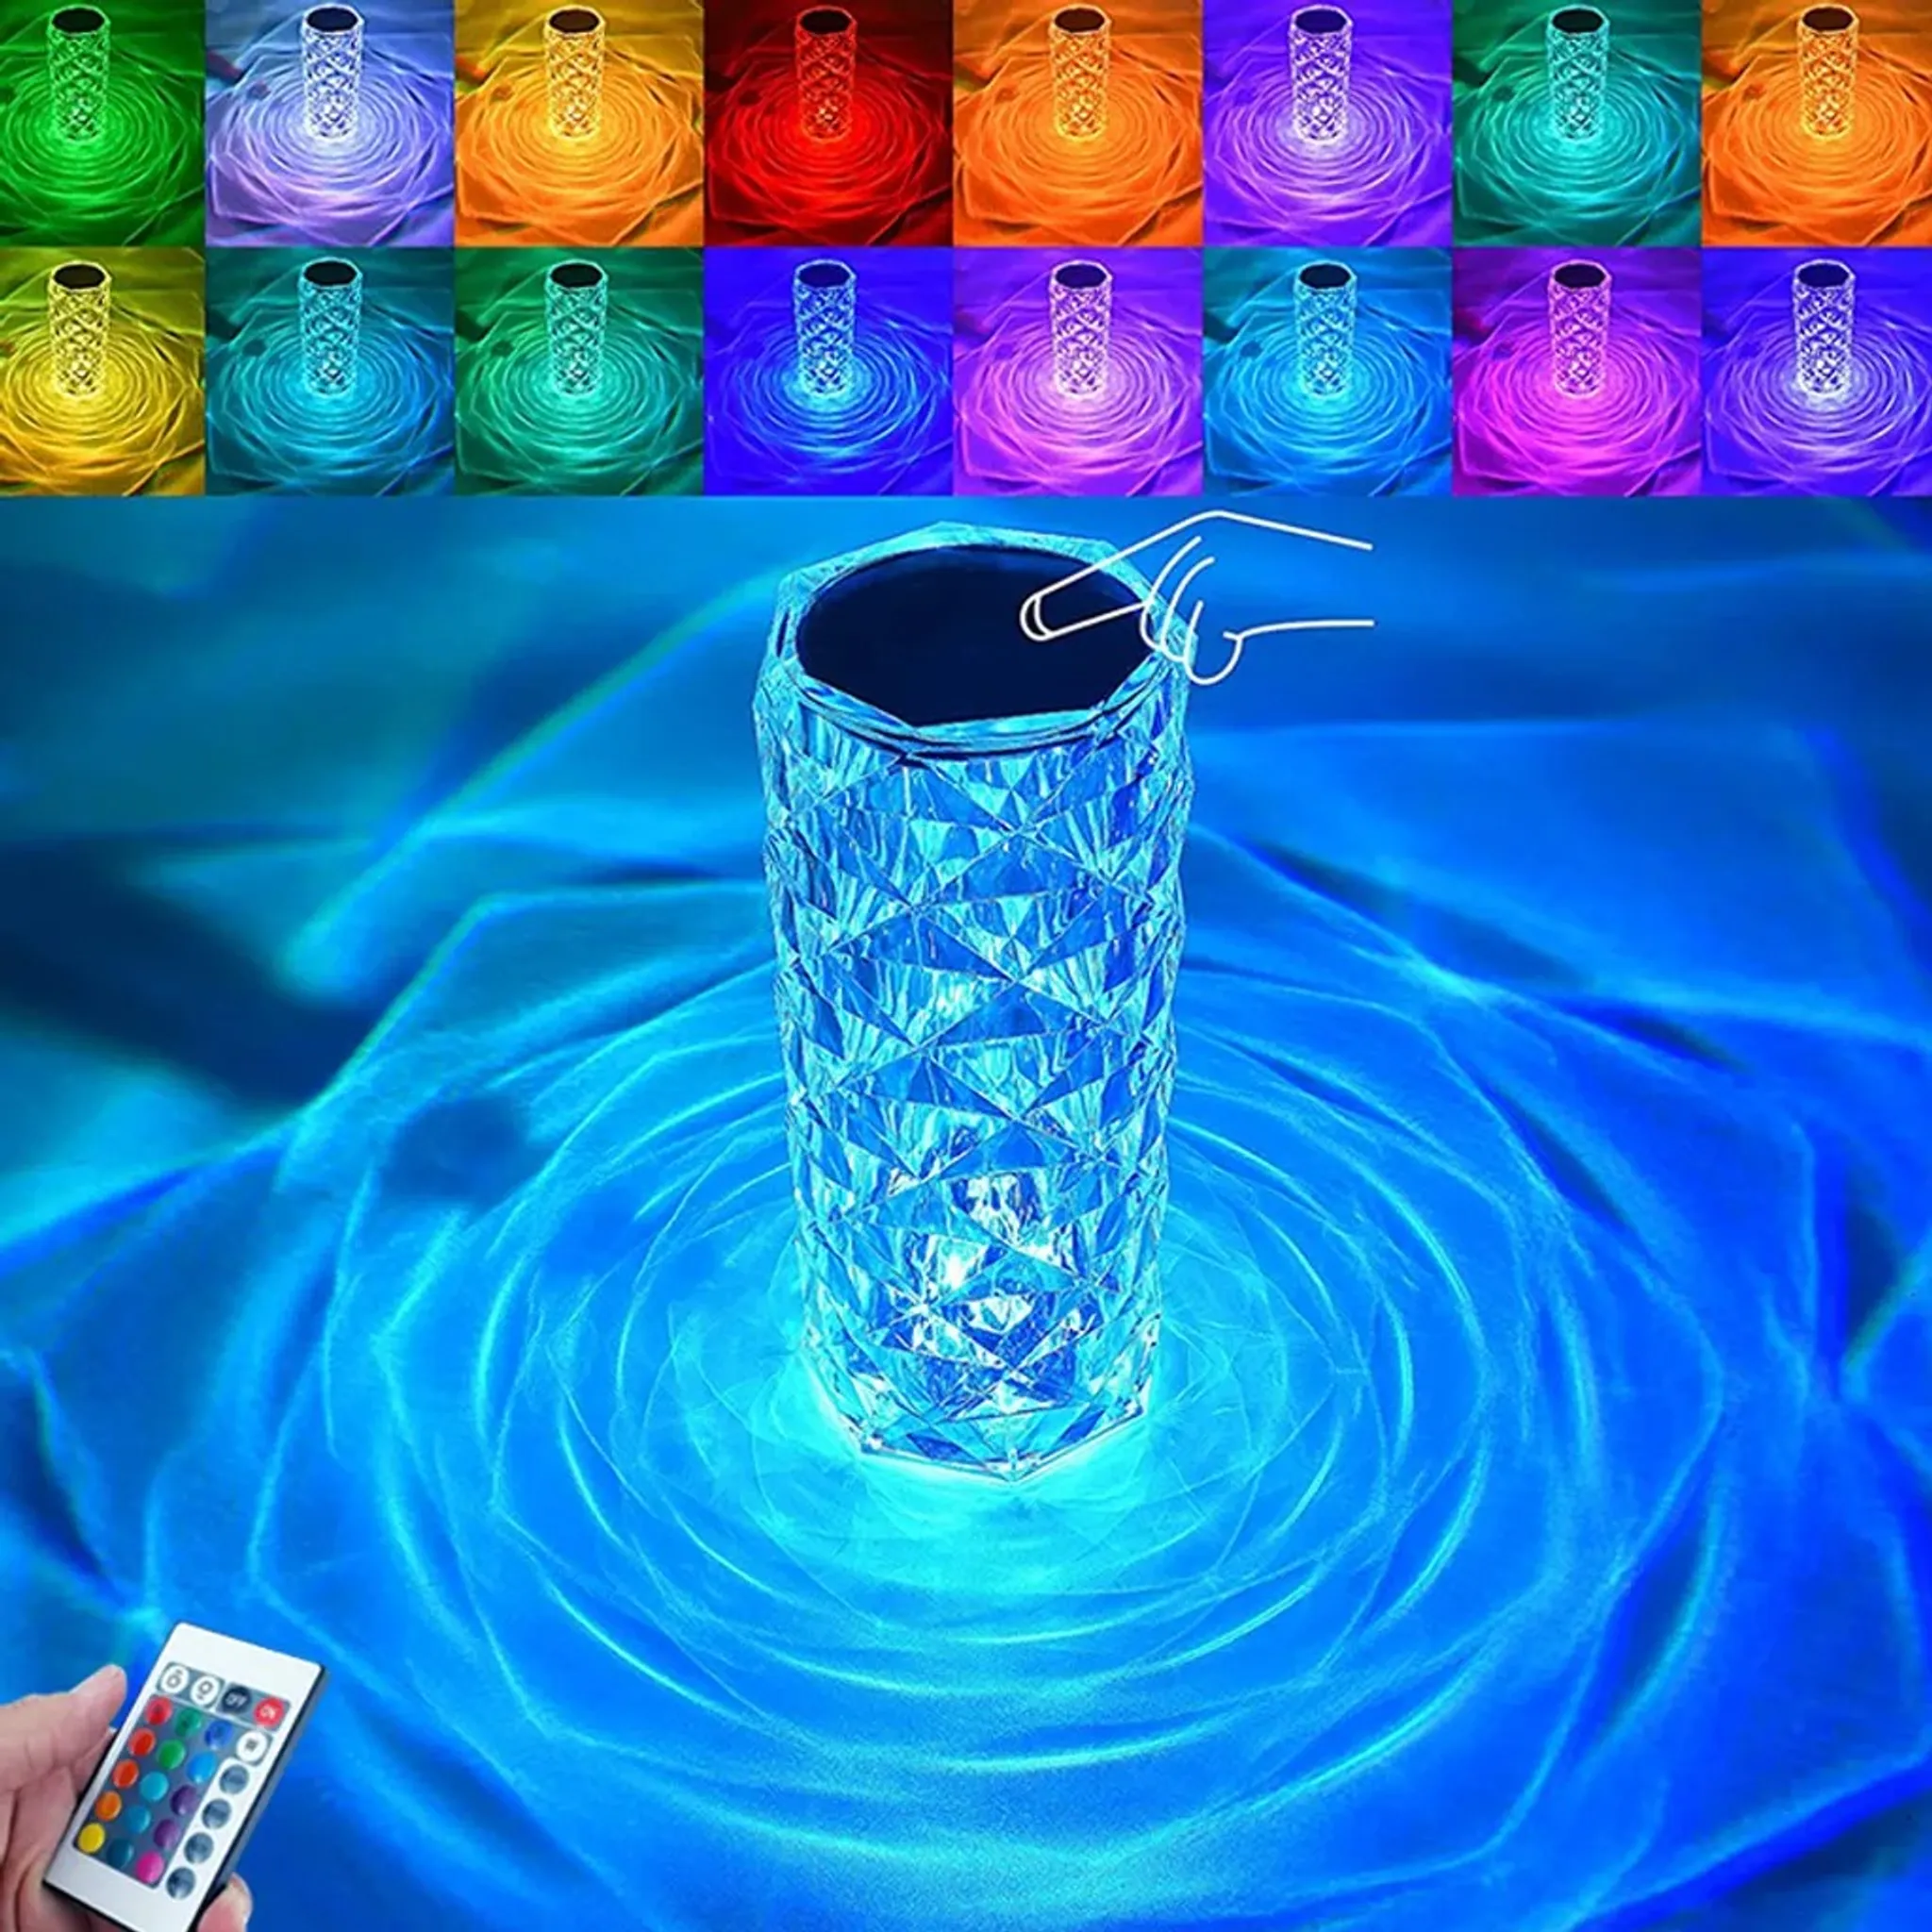 10-Zoll-Kristall-Diamant-Tischlampe, Touch-Control-Nachttischlampe mit USB-Anschluss  Multicolor Change Creative Romantic Rose Acryl LED-Licht